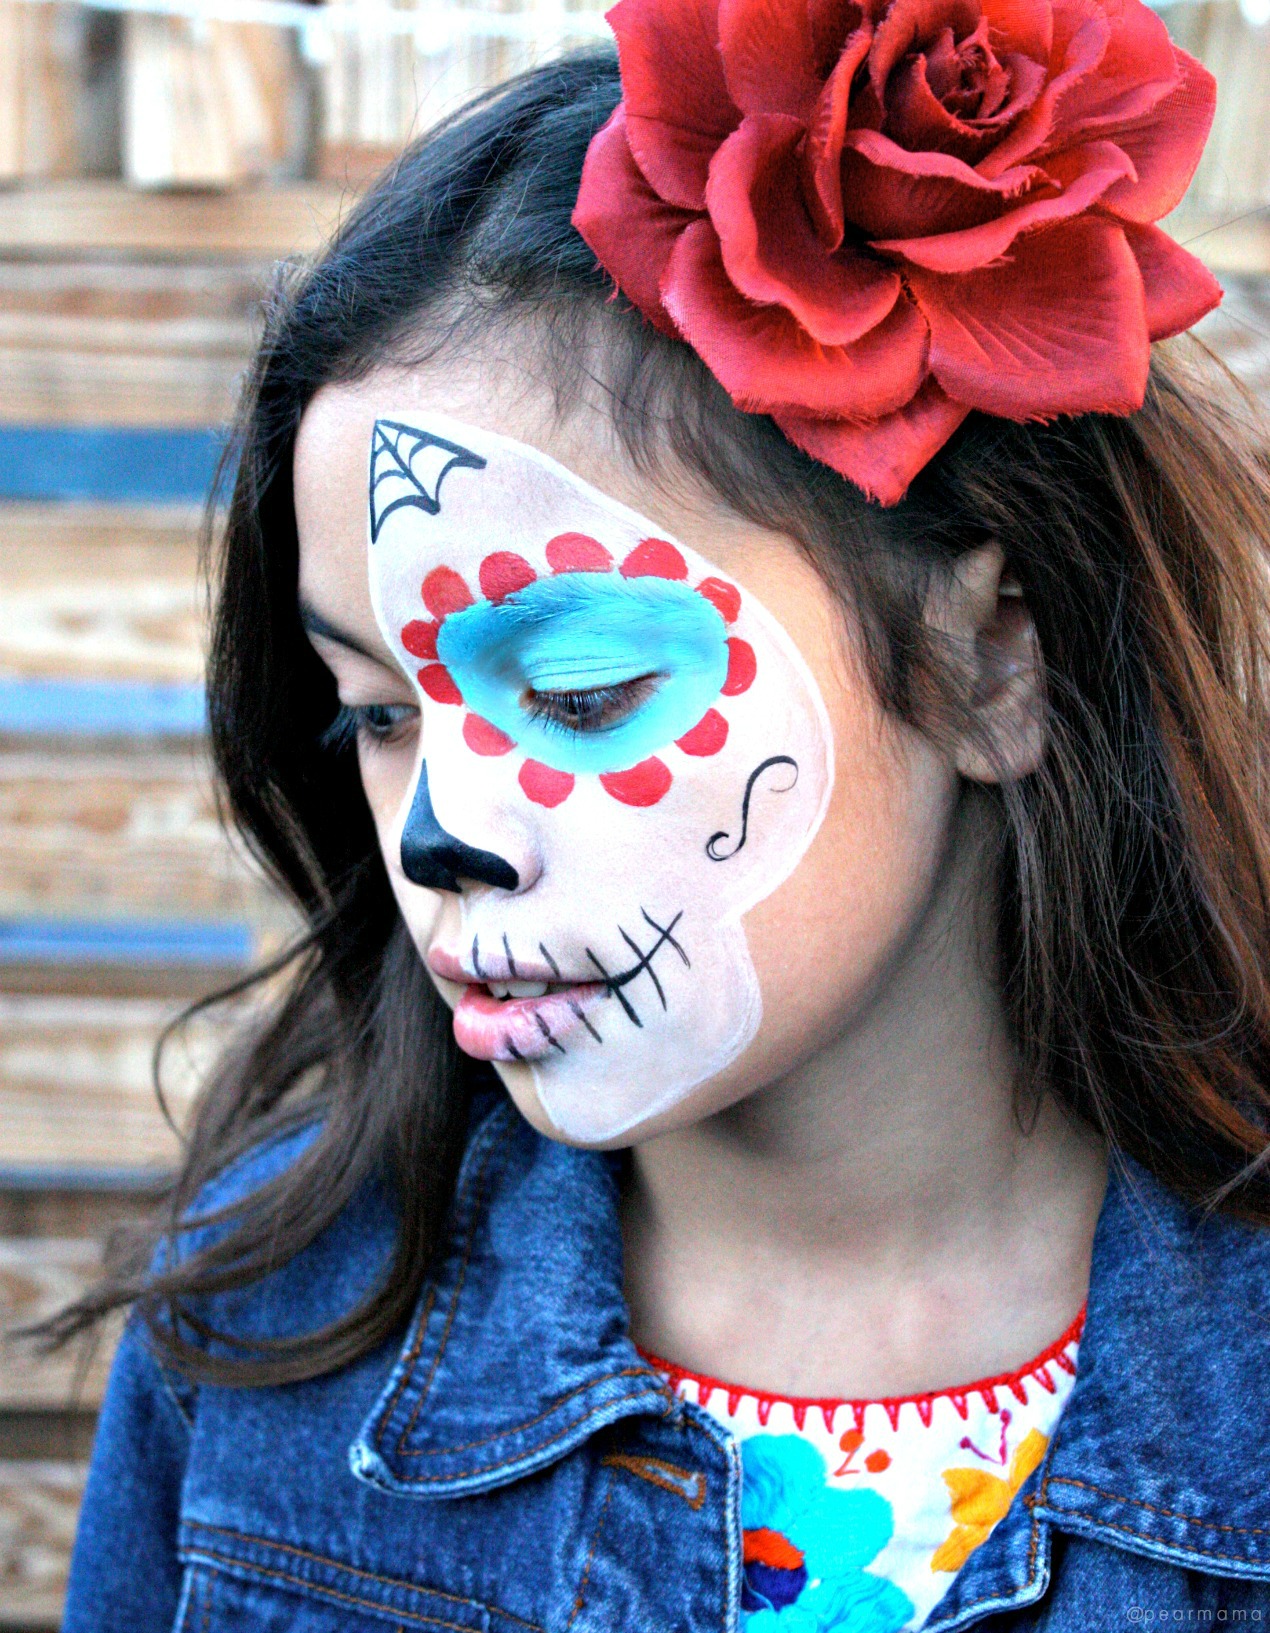 Watch this YouTube video and learn how to paint the perfect sugar skull makeup on your child to celebrate Day of the Dead.